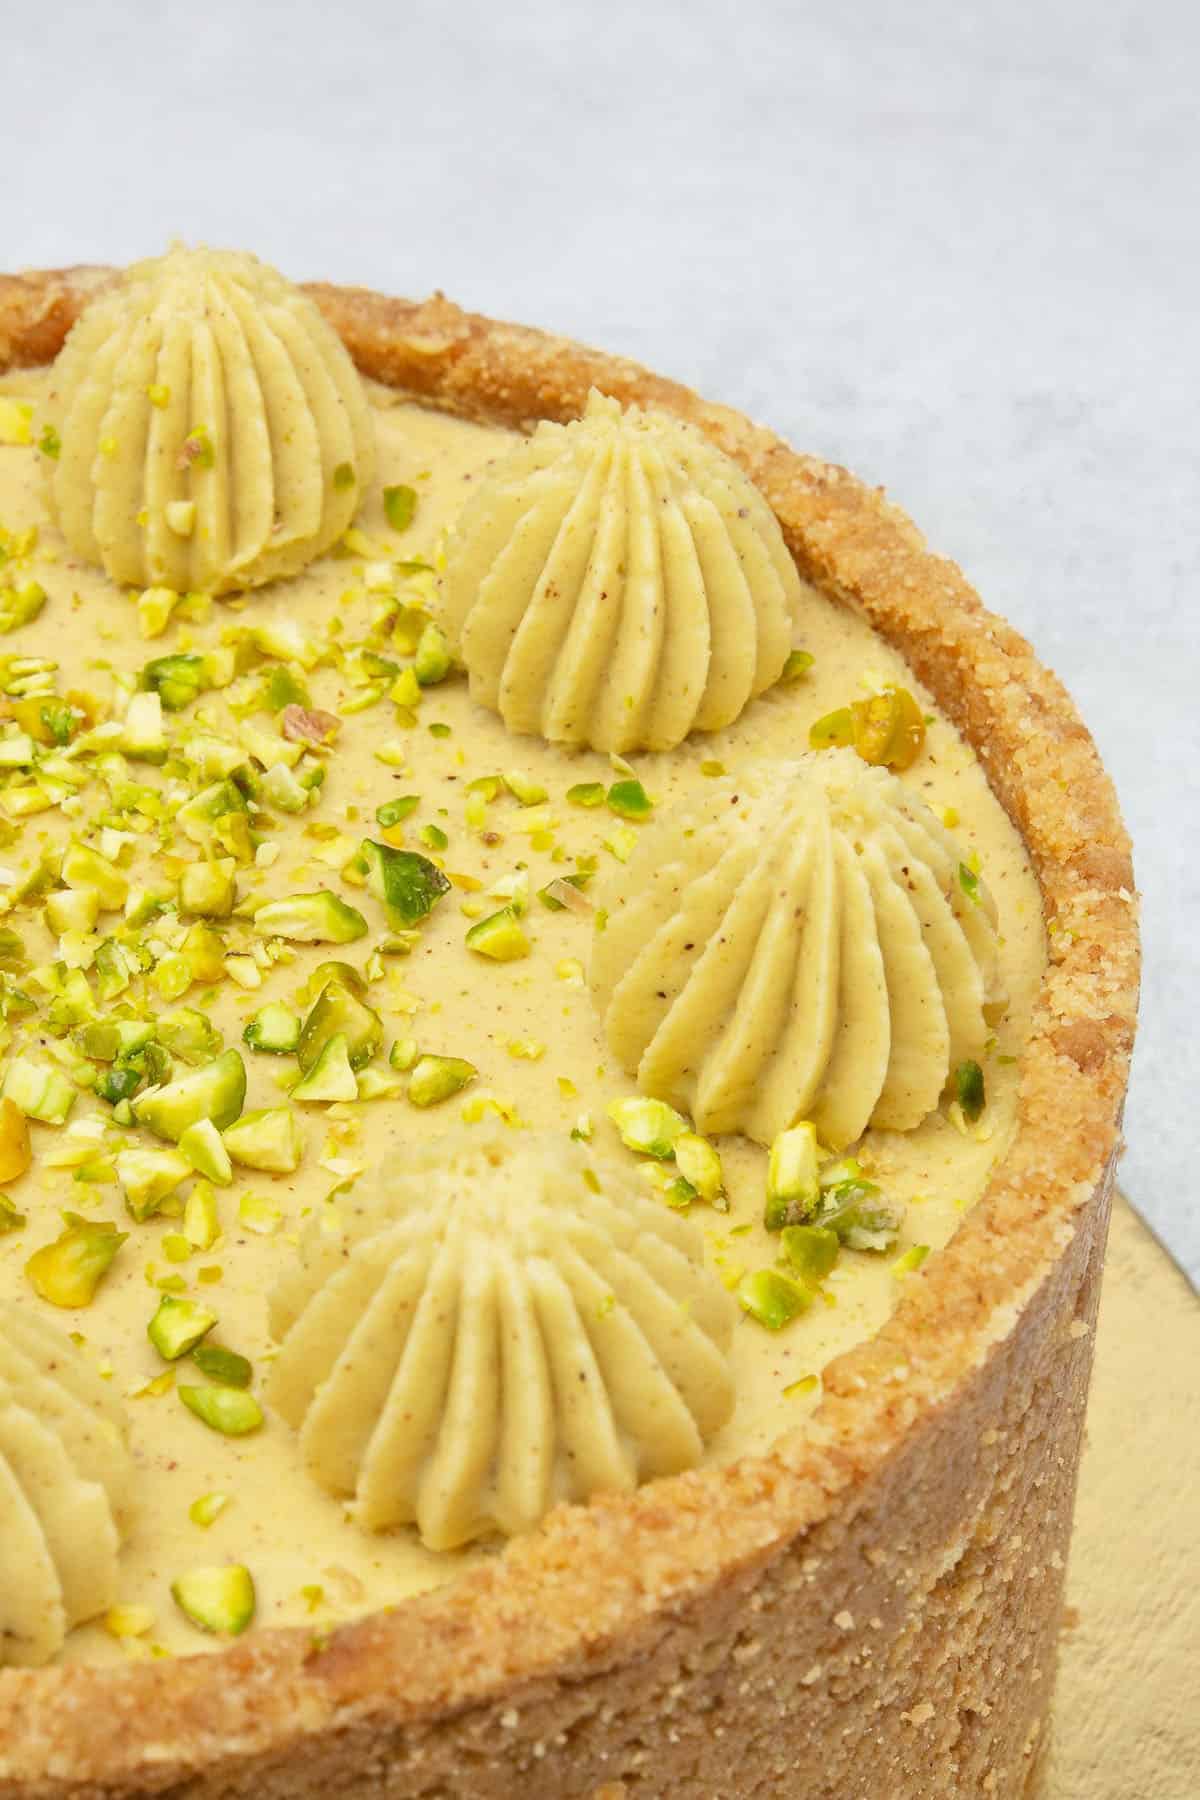 Pistachio cheesecake on a cake stand.